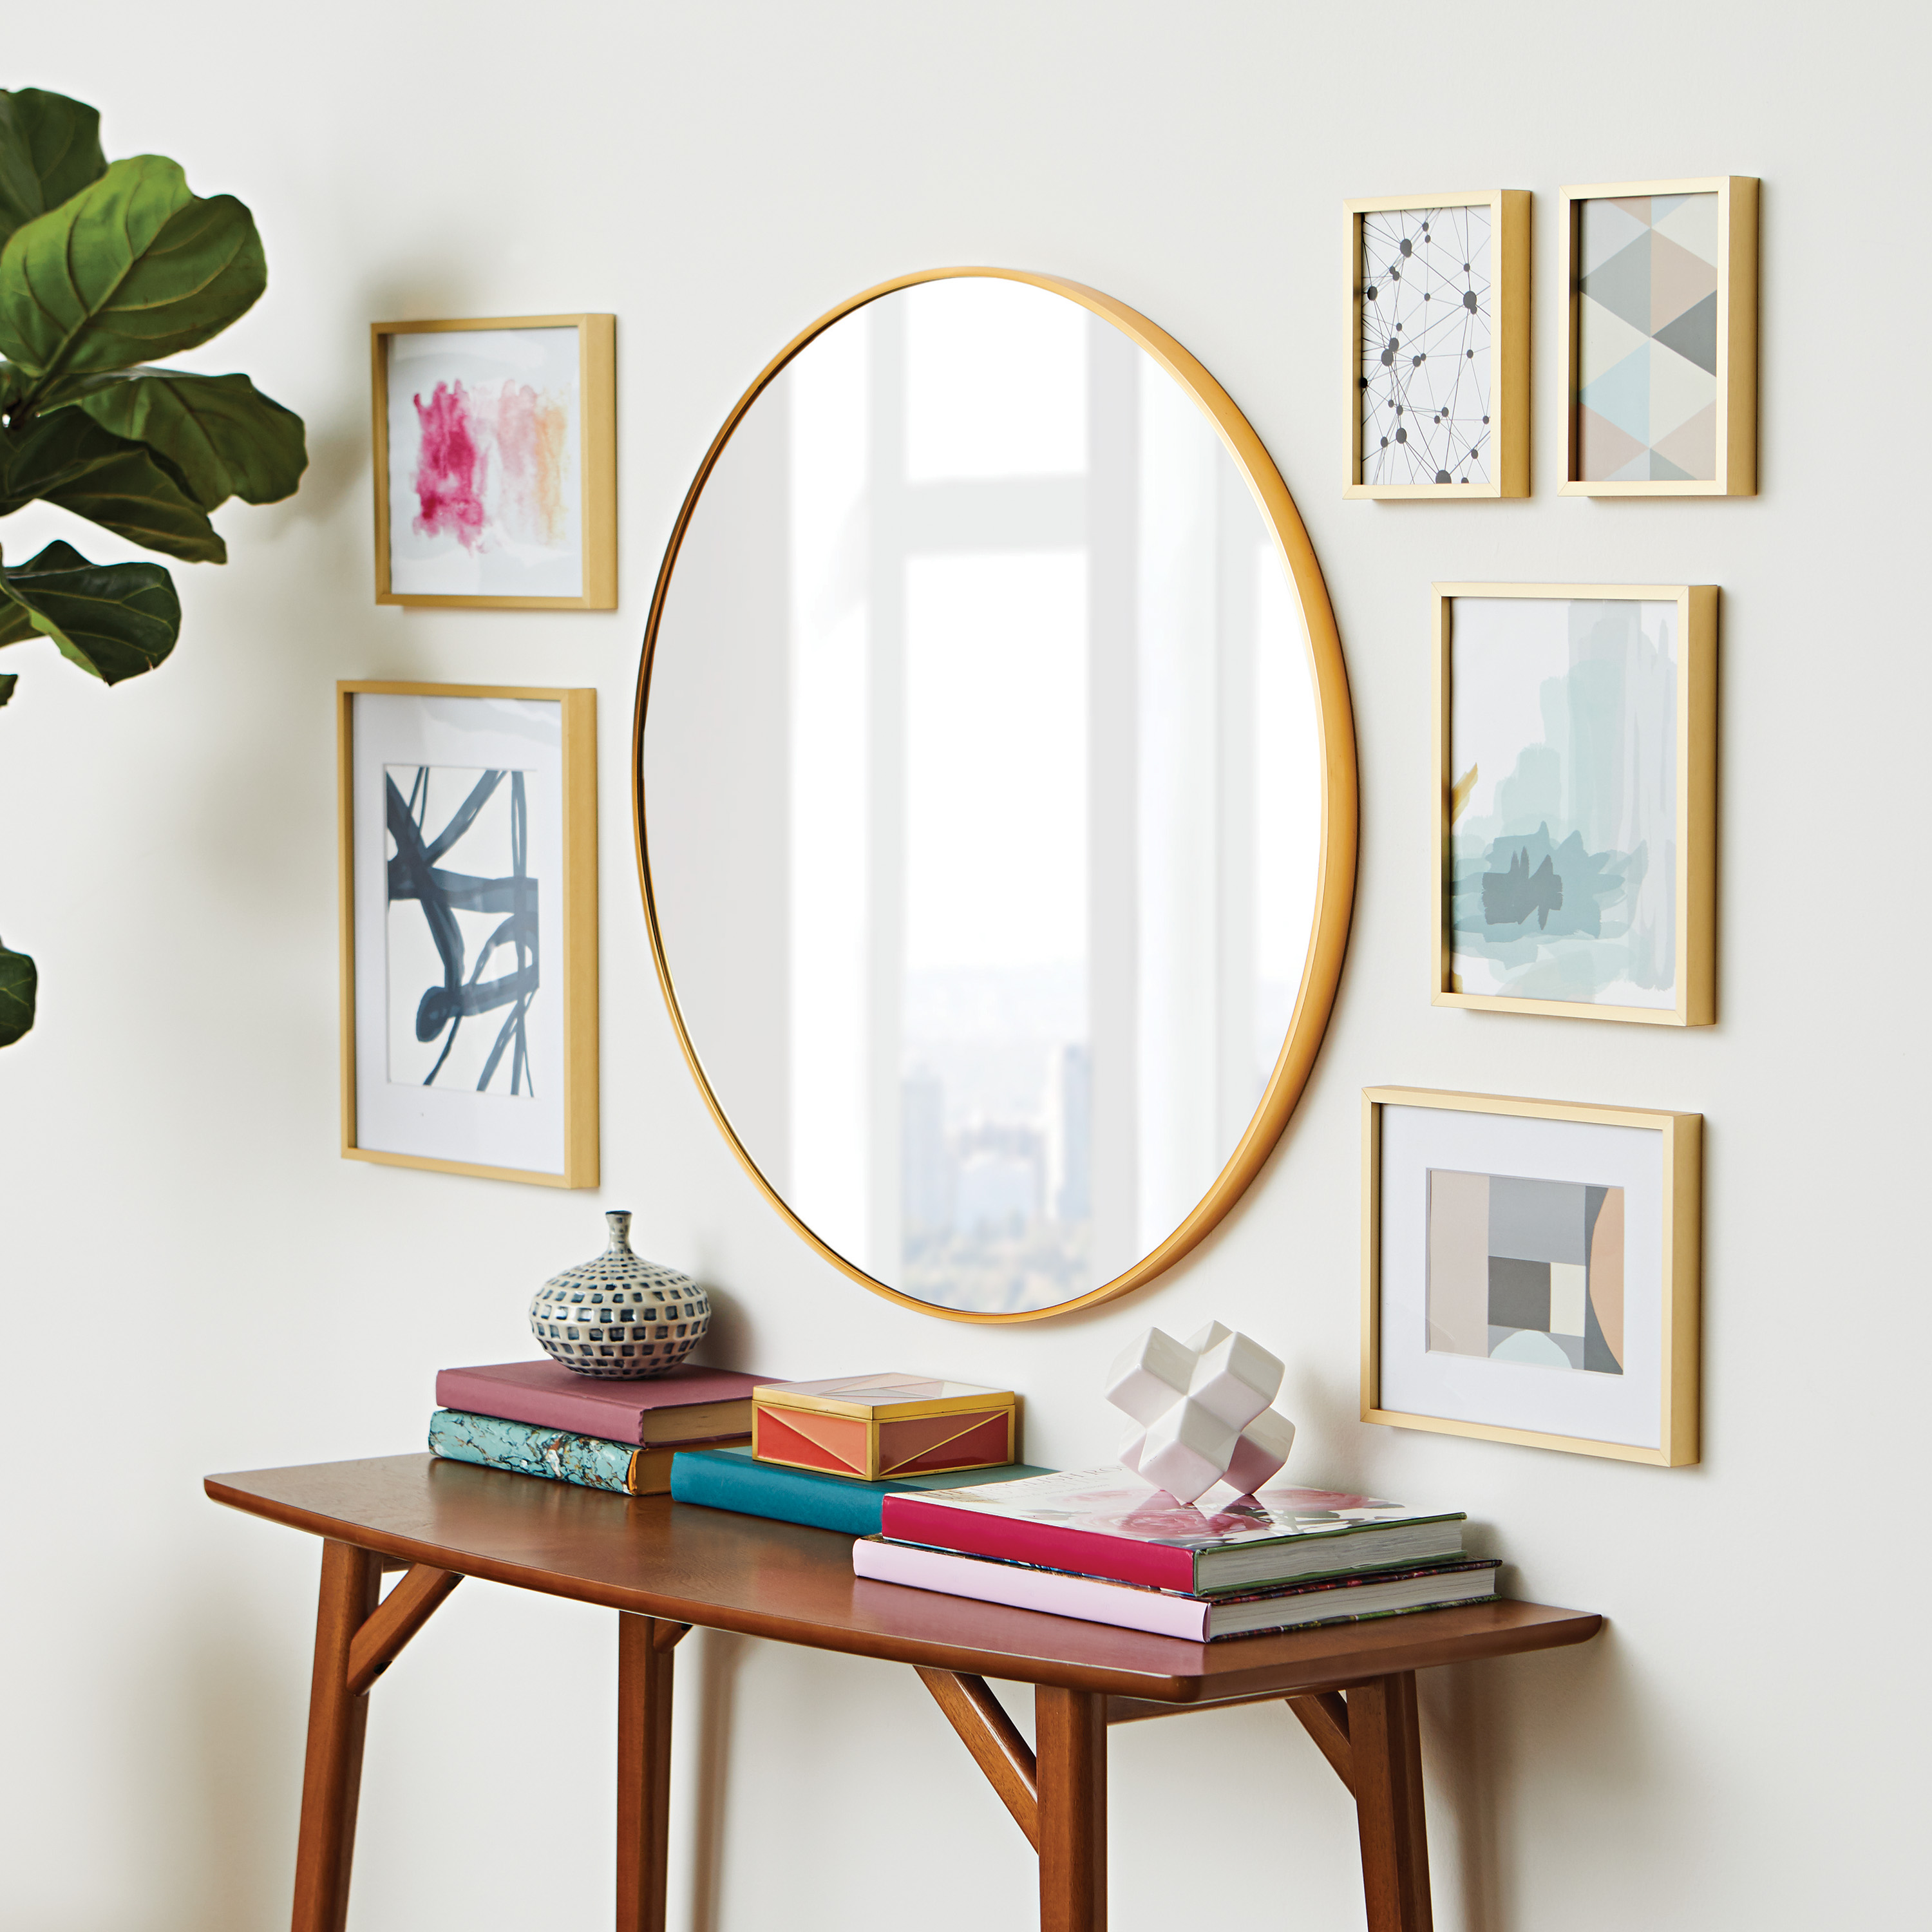 Better Homes & Gardens 28" x 28" Gold Glam, Modern and Bohemian Vanity Mirror - image 4 of 6